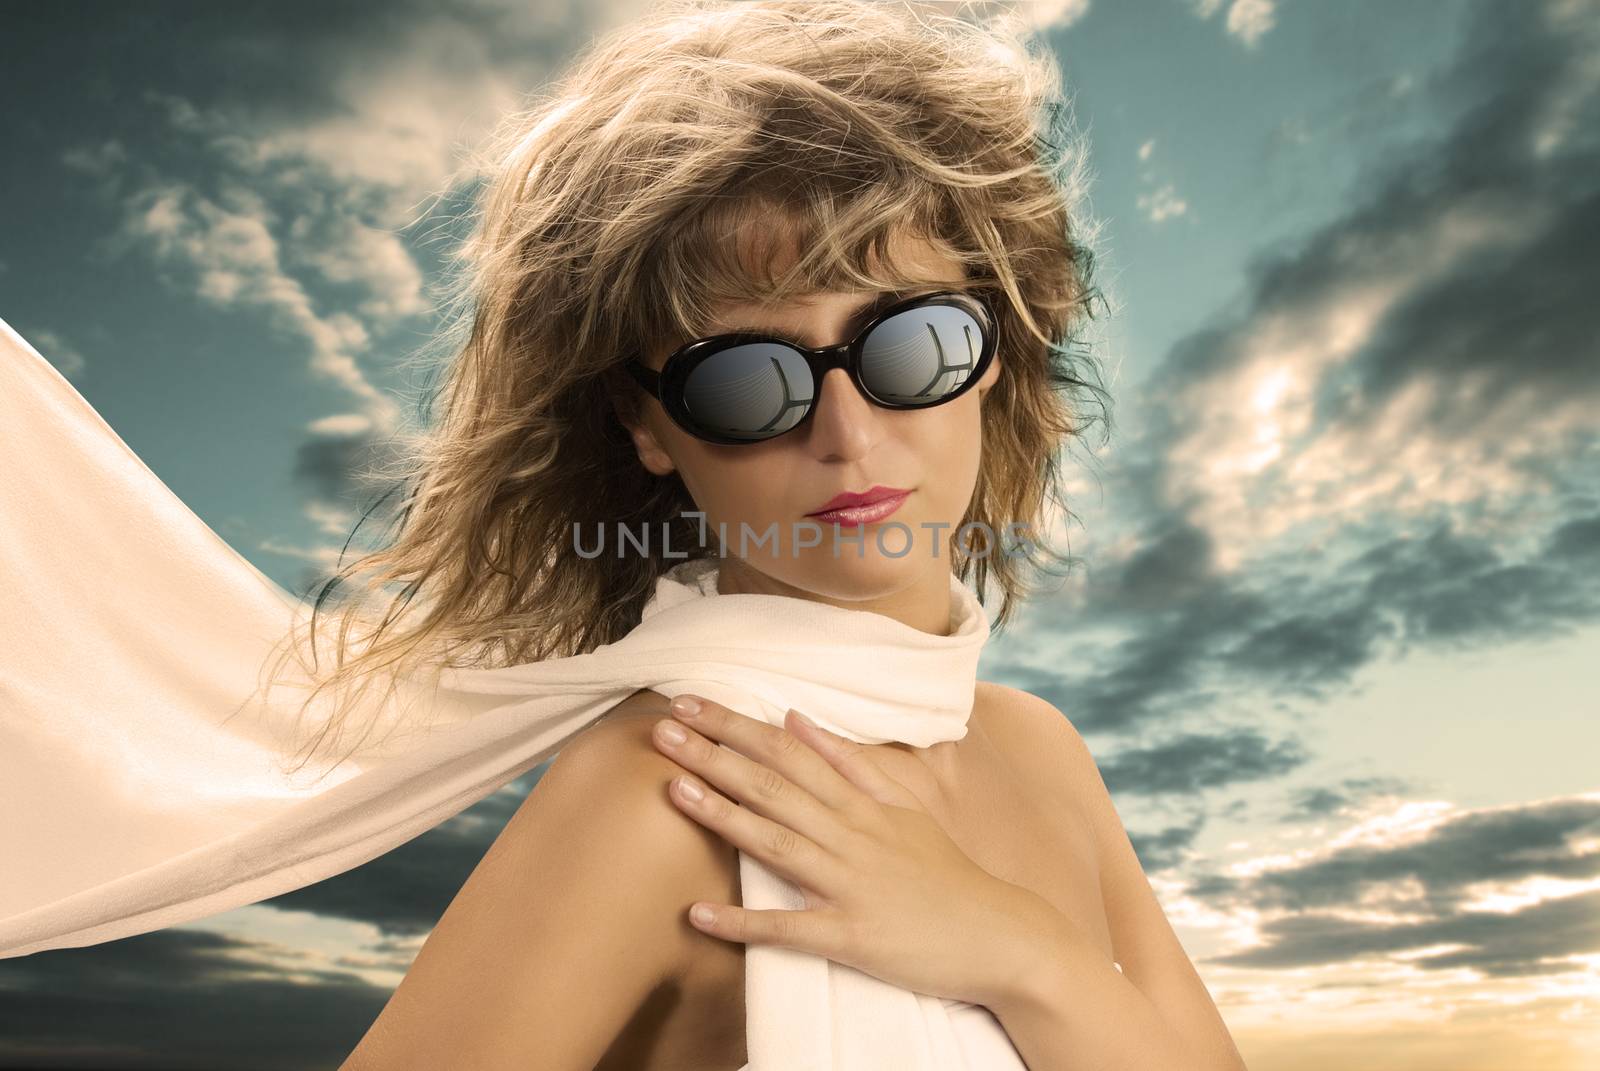 blond girl with a silk scarf and sun glasses in a vintage portrait